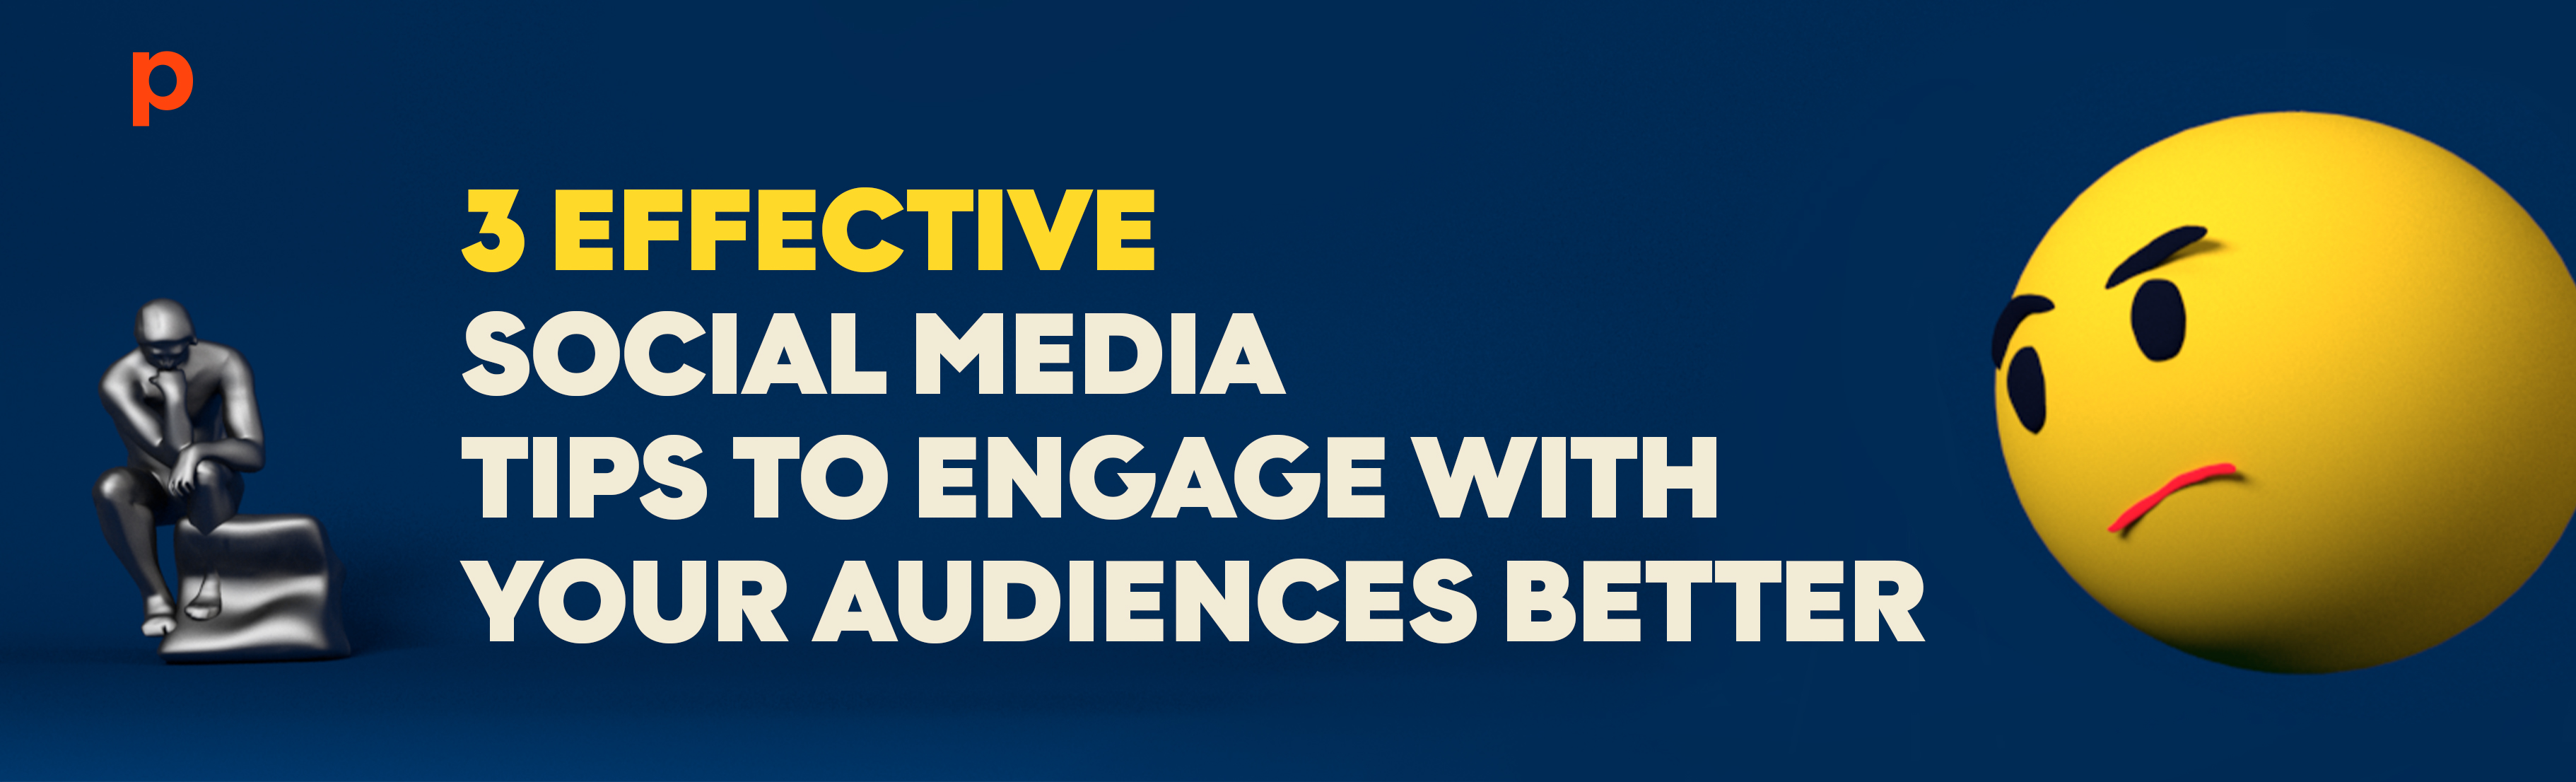 3 Effective Social Media Tips to Engage with your audiences better